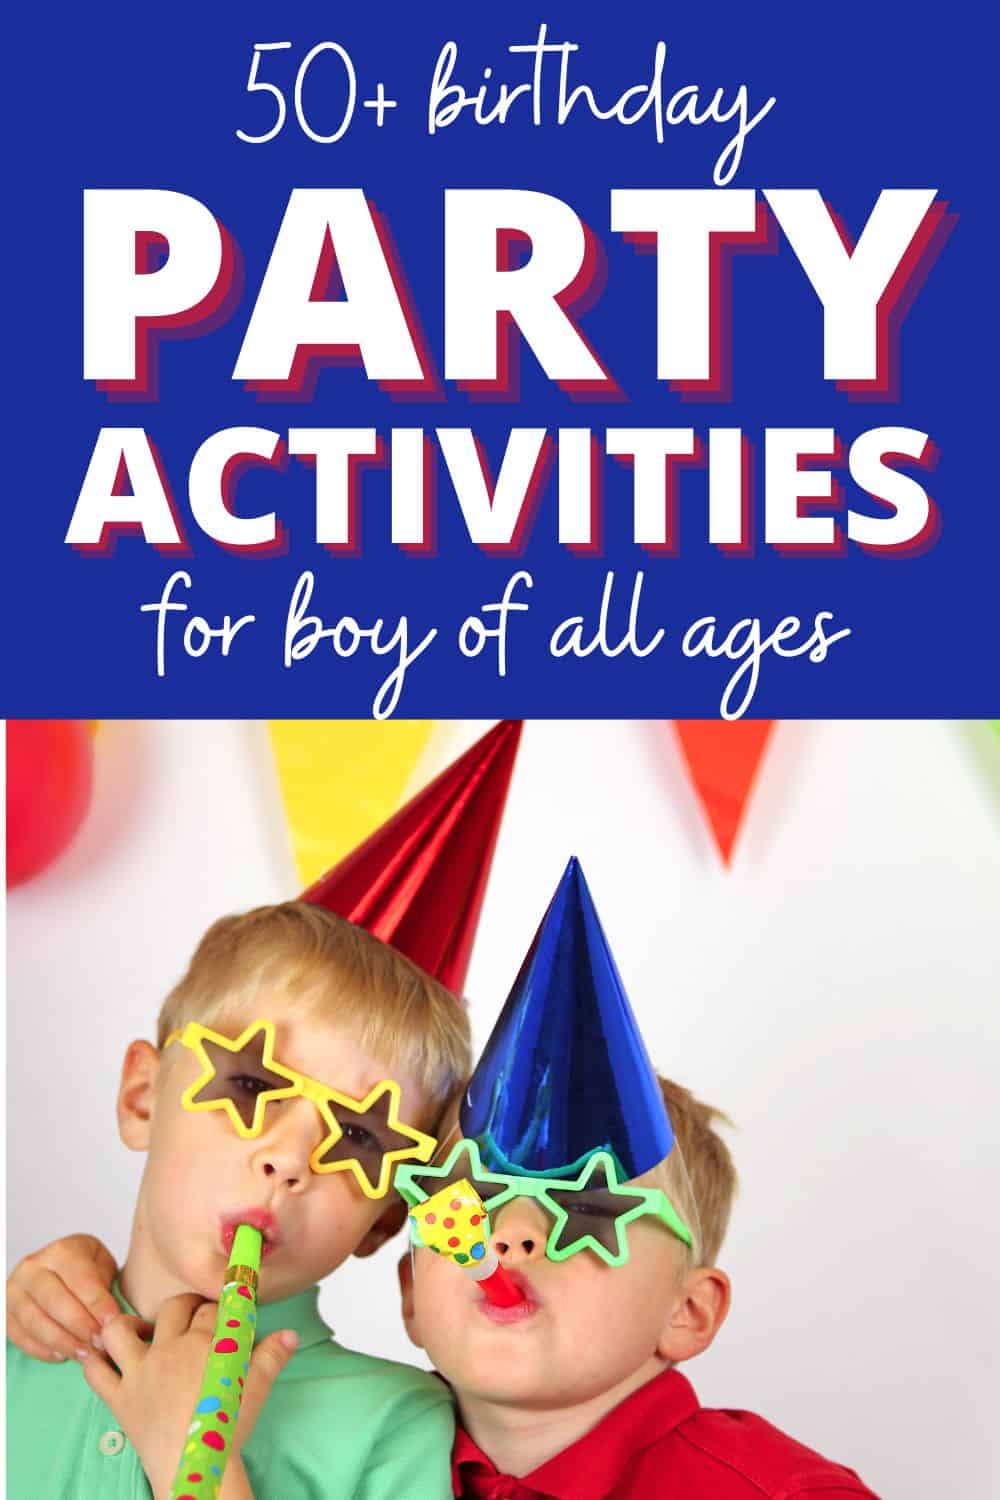 50+ fun (& easy to organize) games & activities for a boy’s birthday party